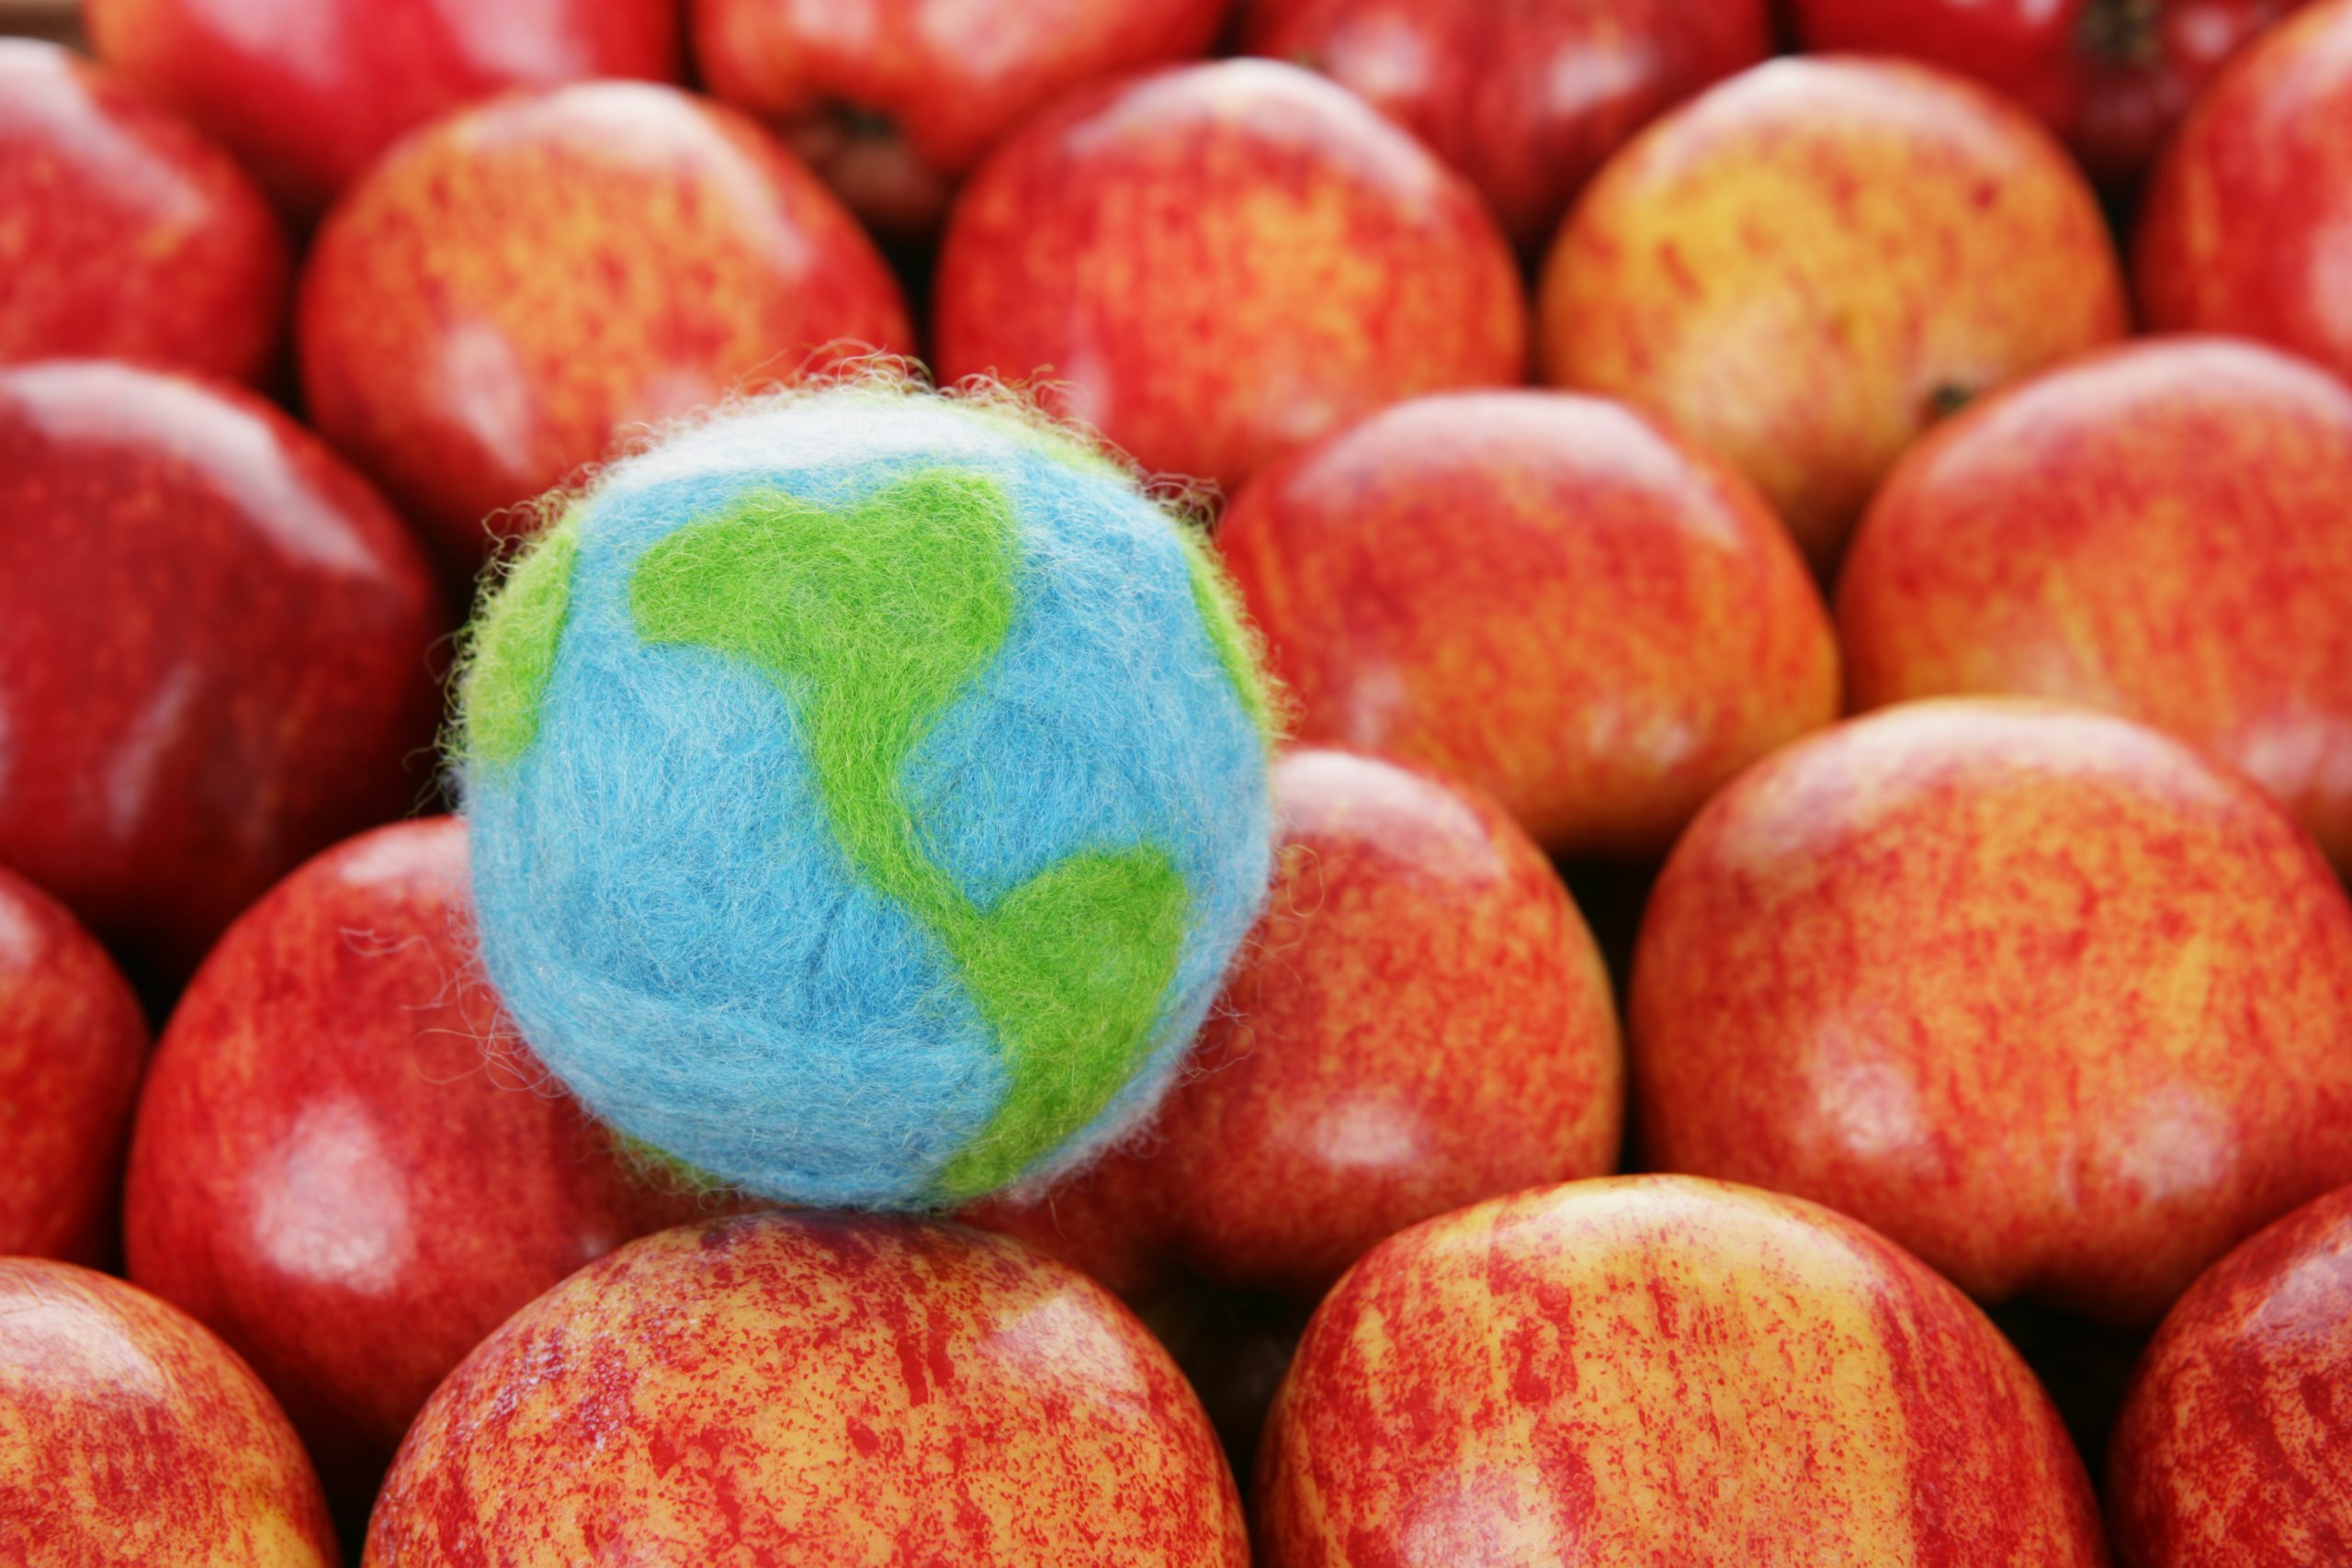 Nutrition Experts Share 6 Earth-Friendlier Ways to Enjoy Your Favorite Foods